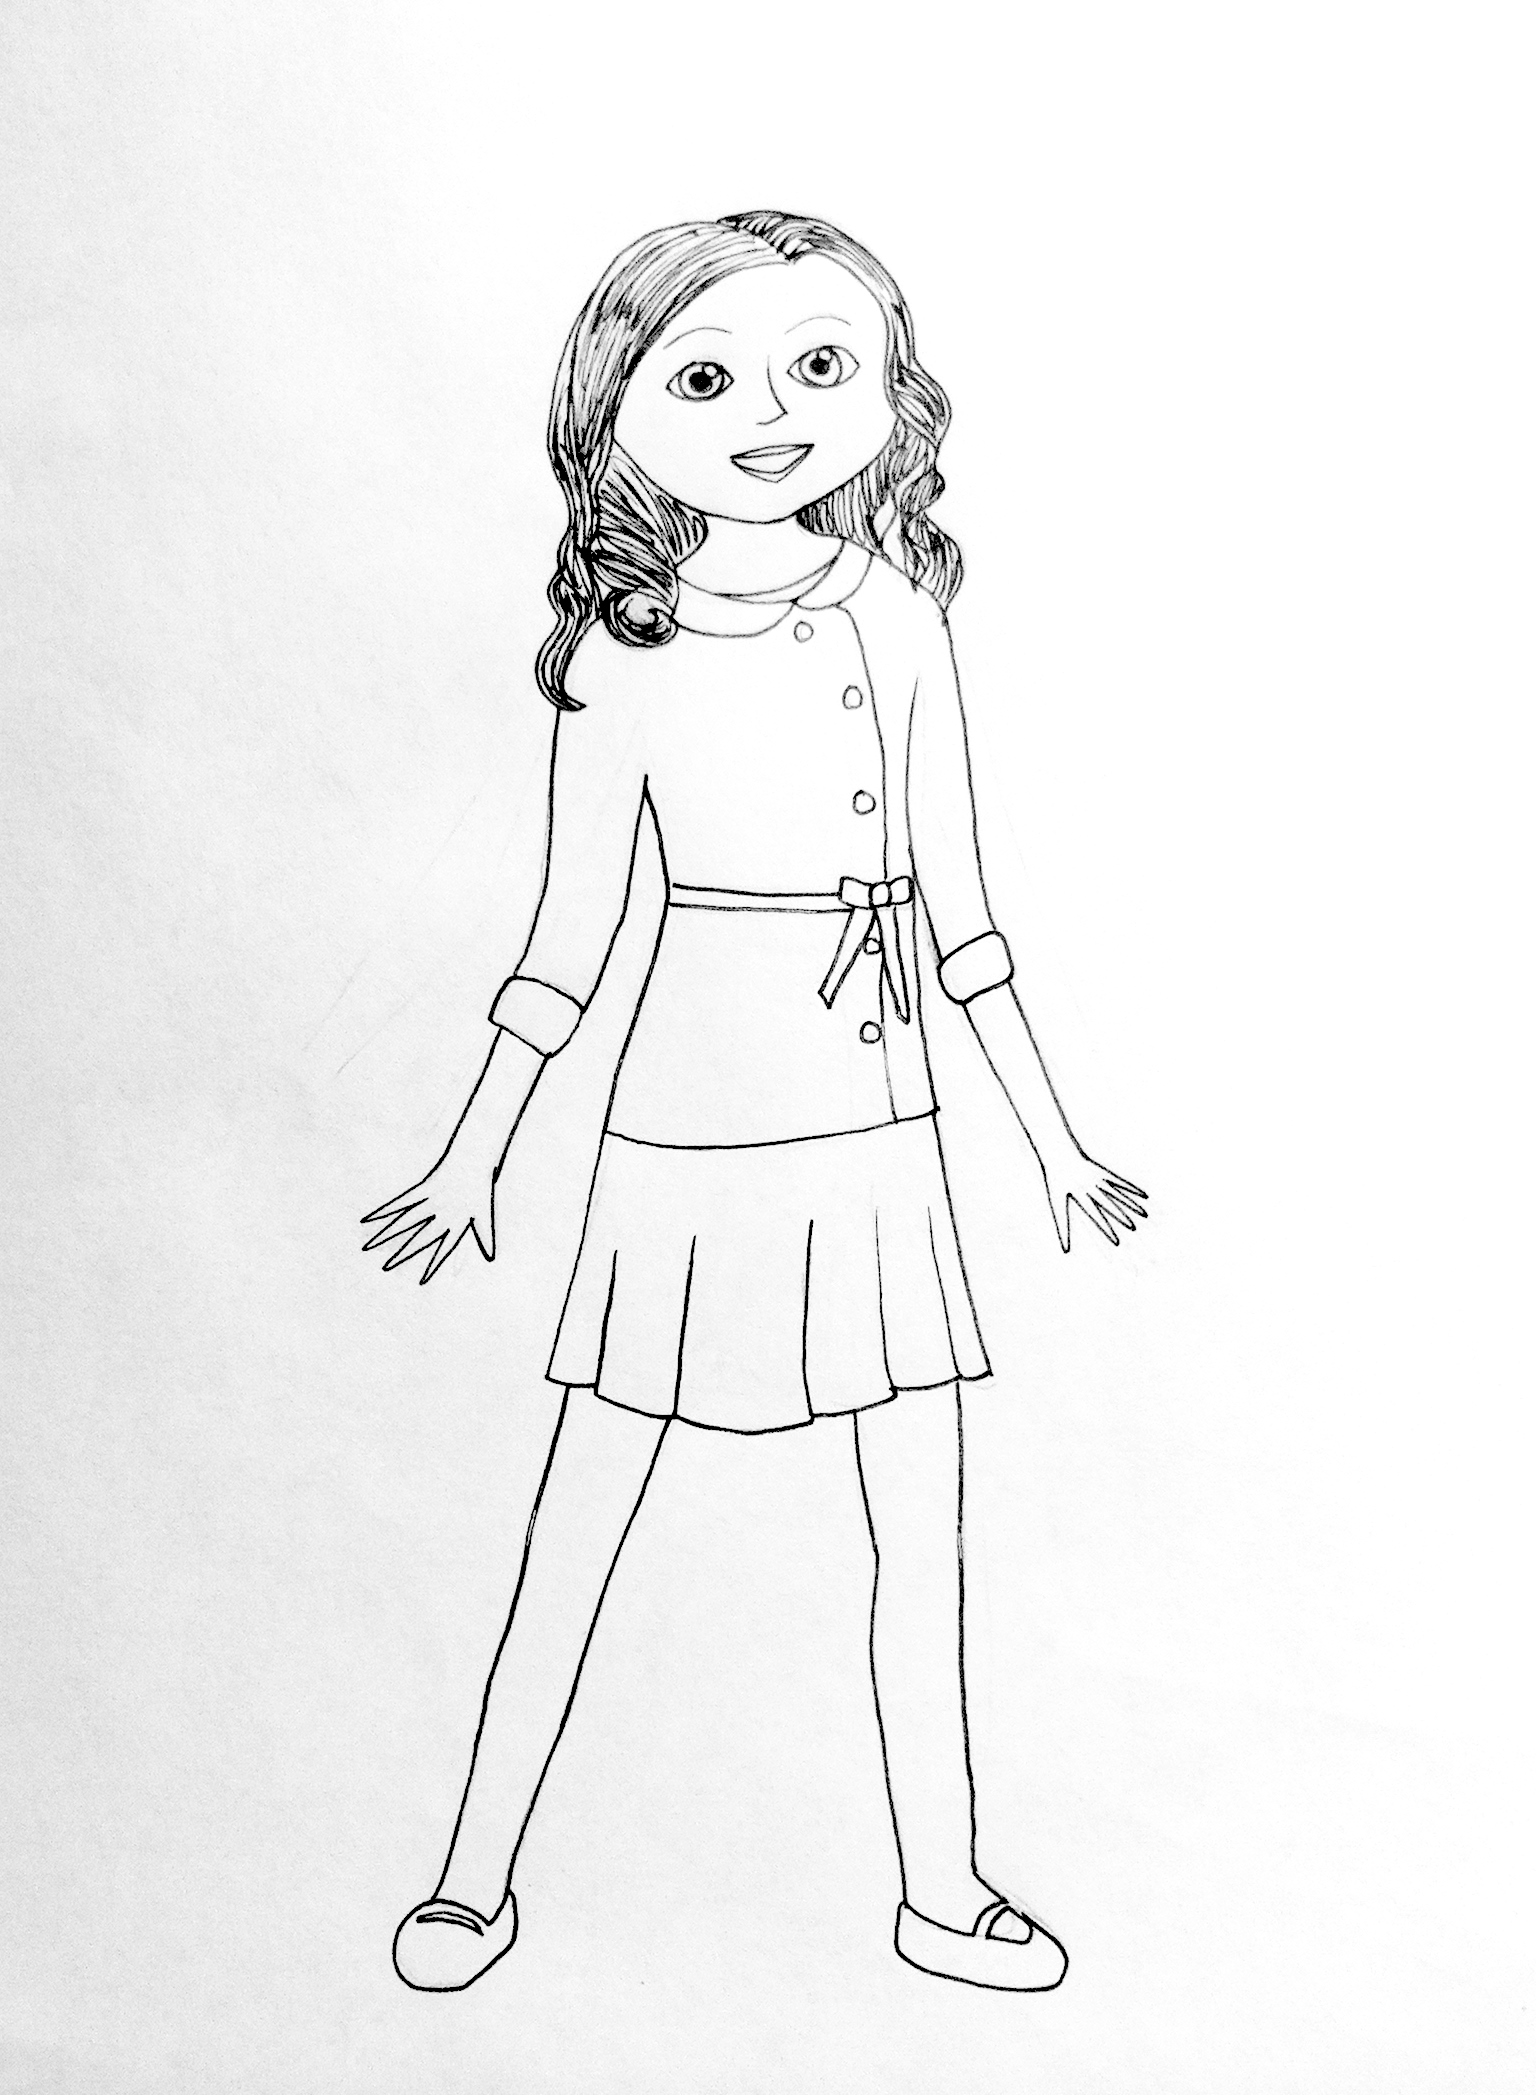 American girl doll coloring pages